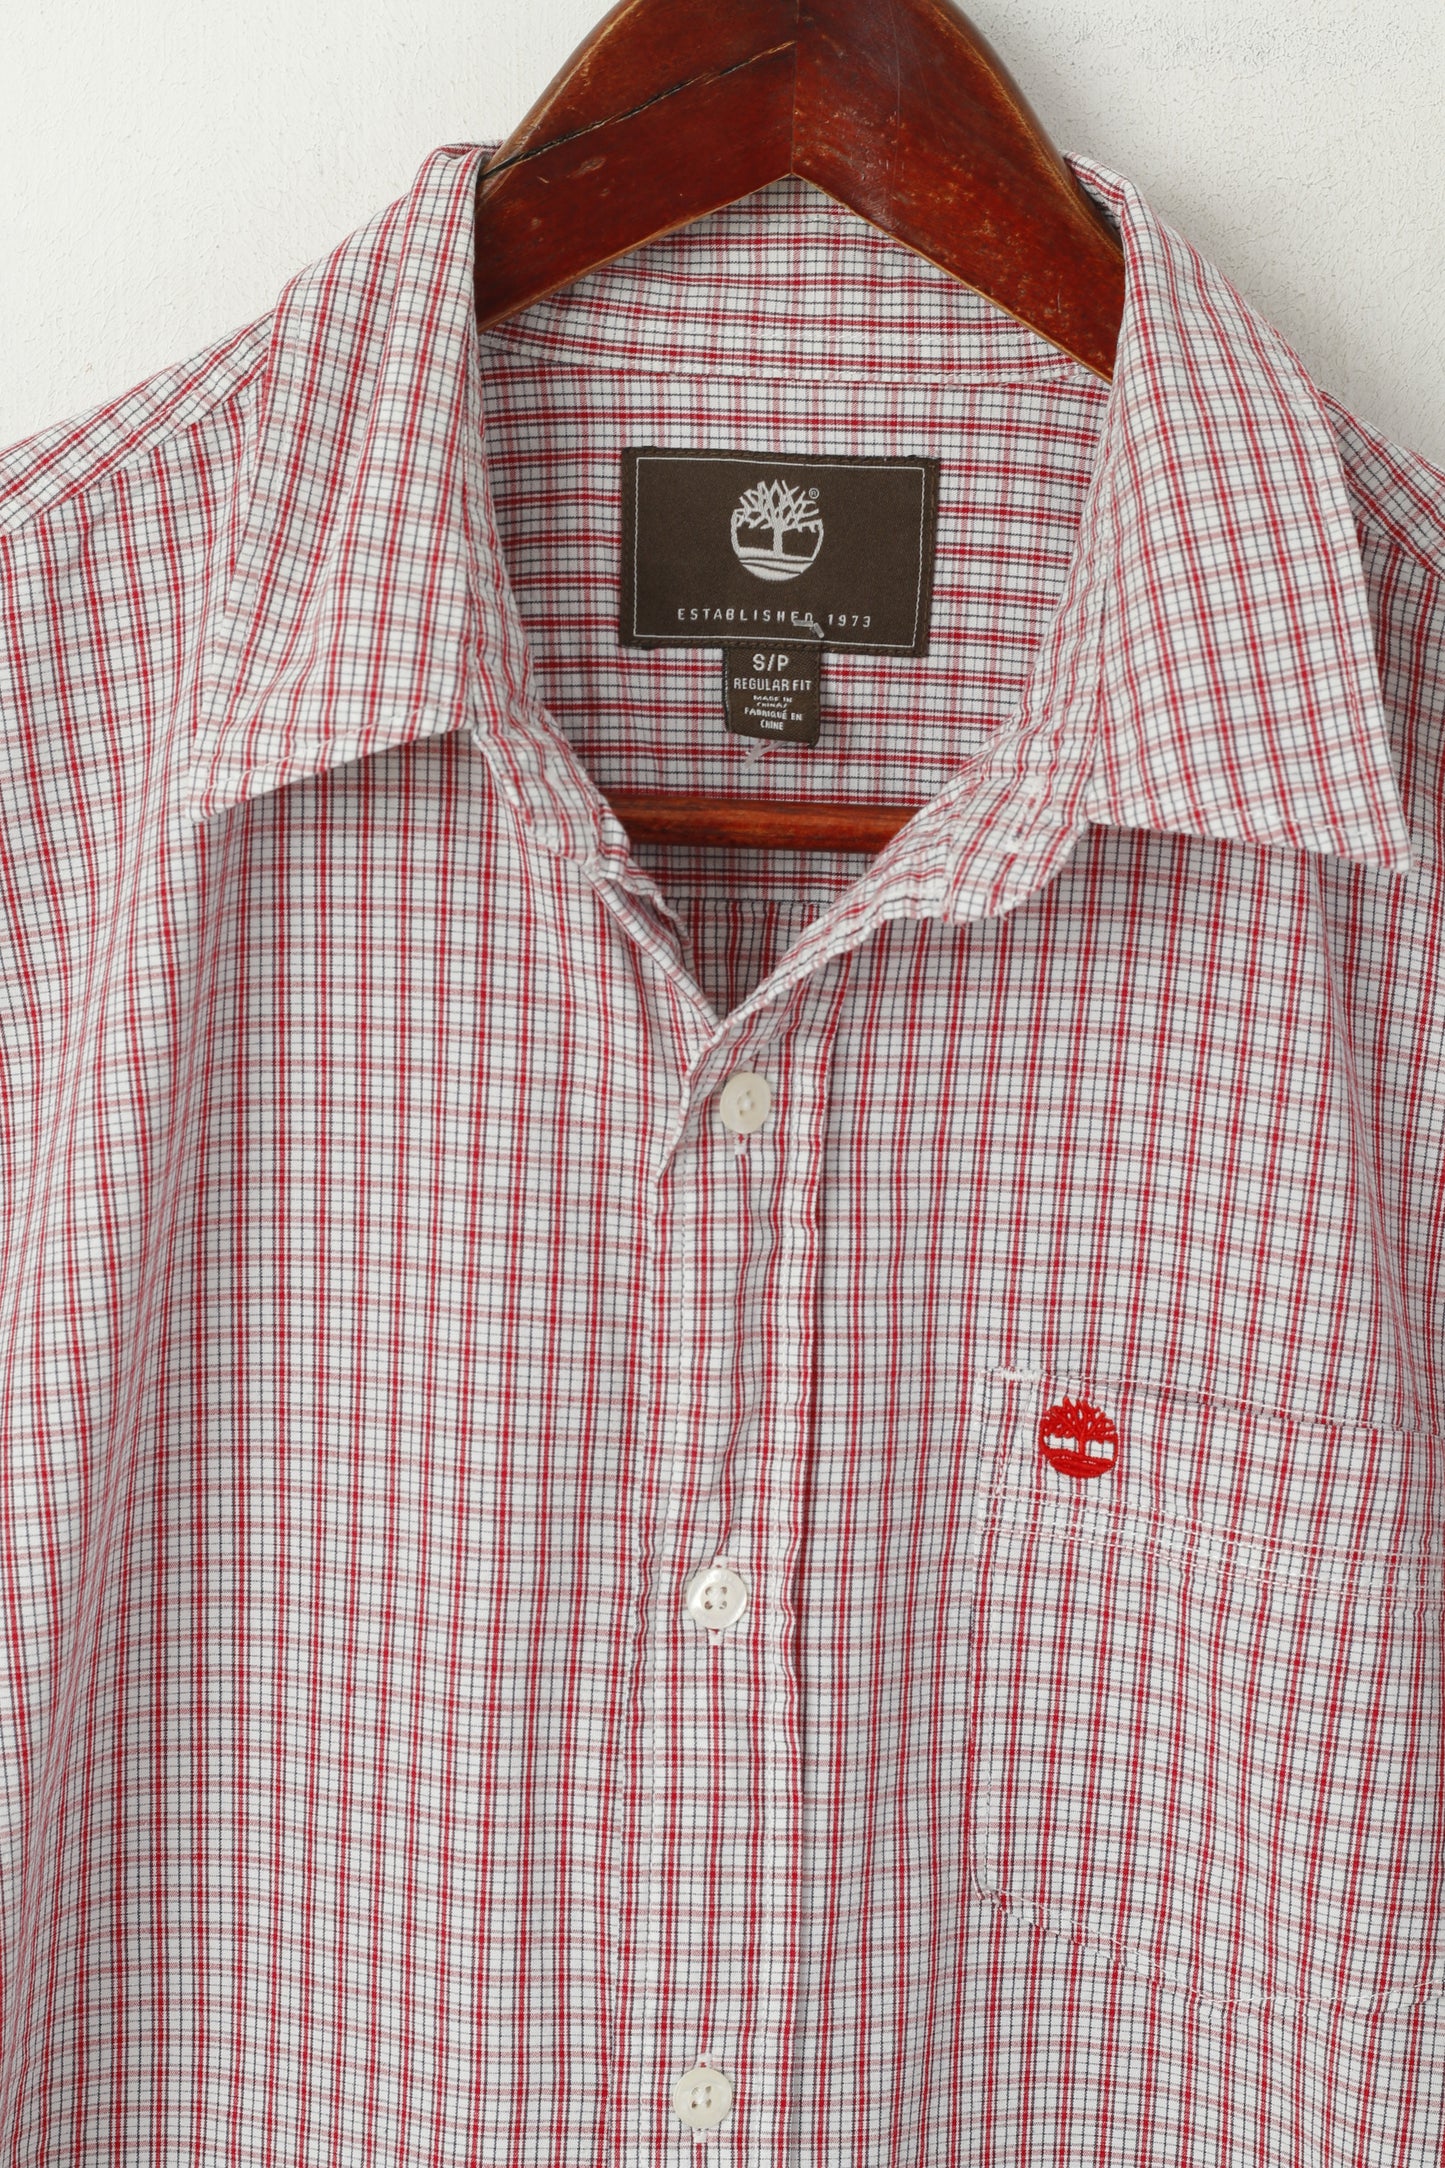 Timberland Men S Casual Shirt Red Check Cotton Regular Fit Long Sleeve Top